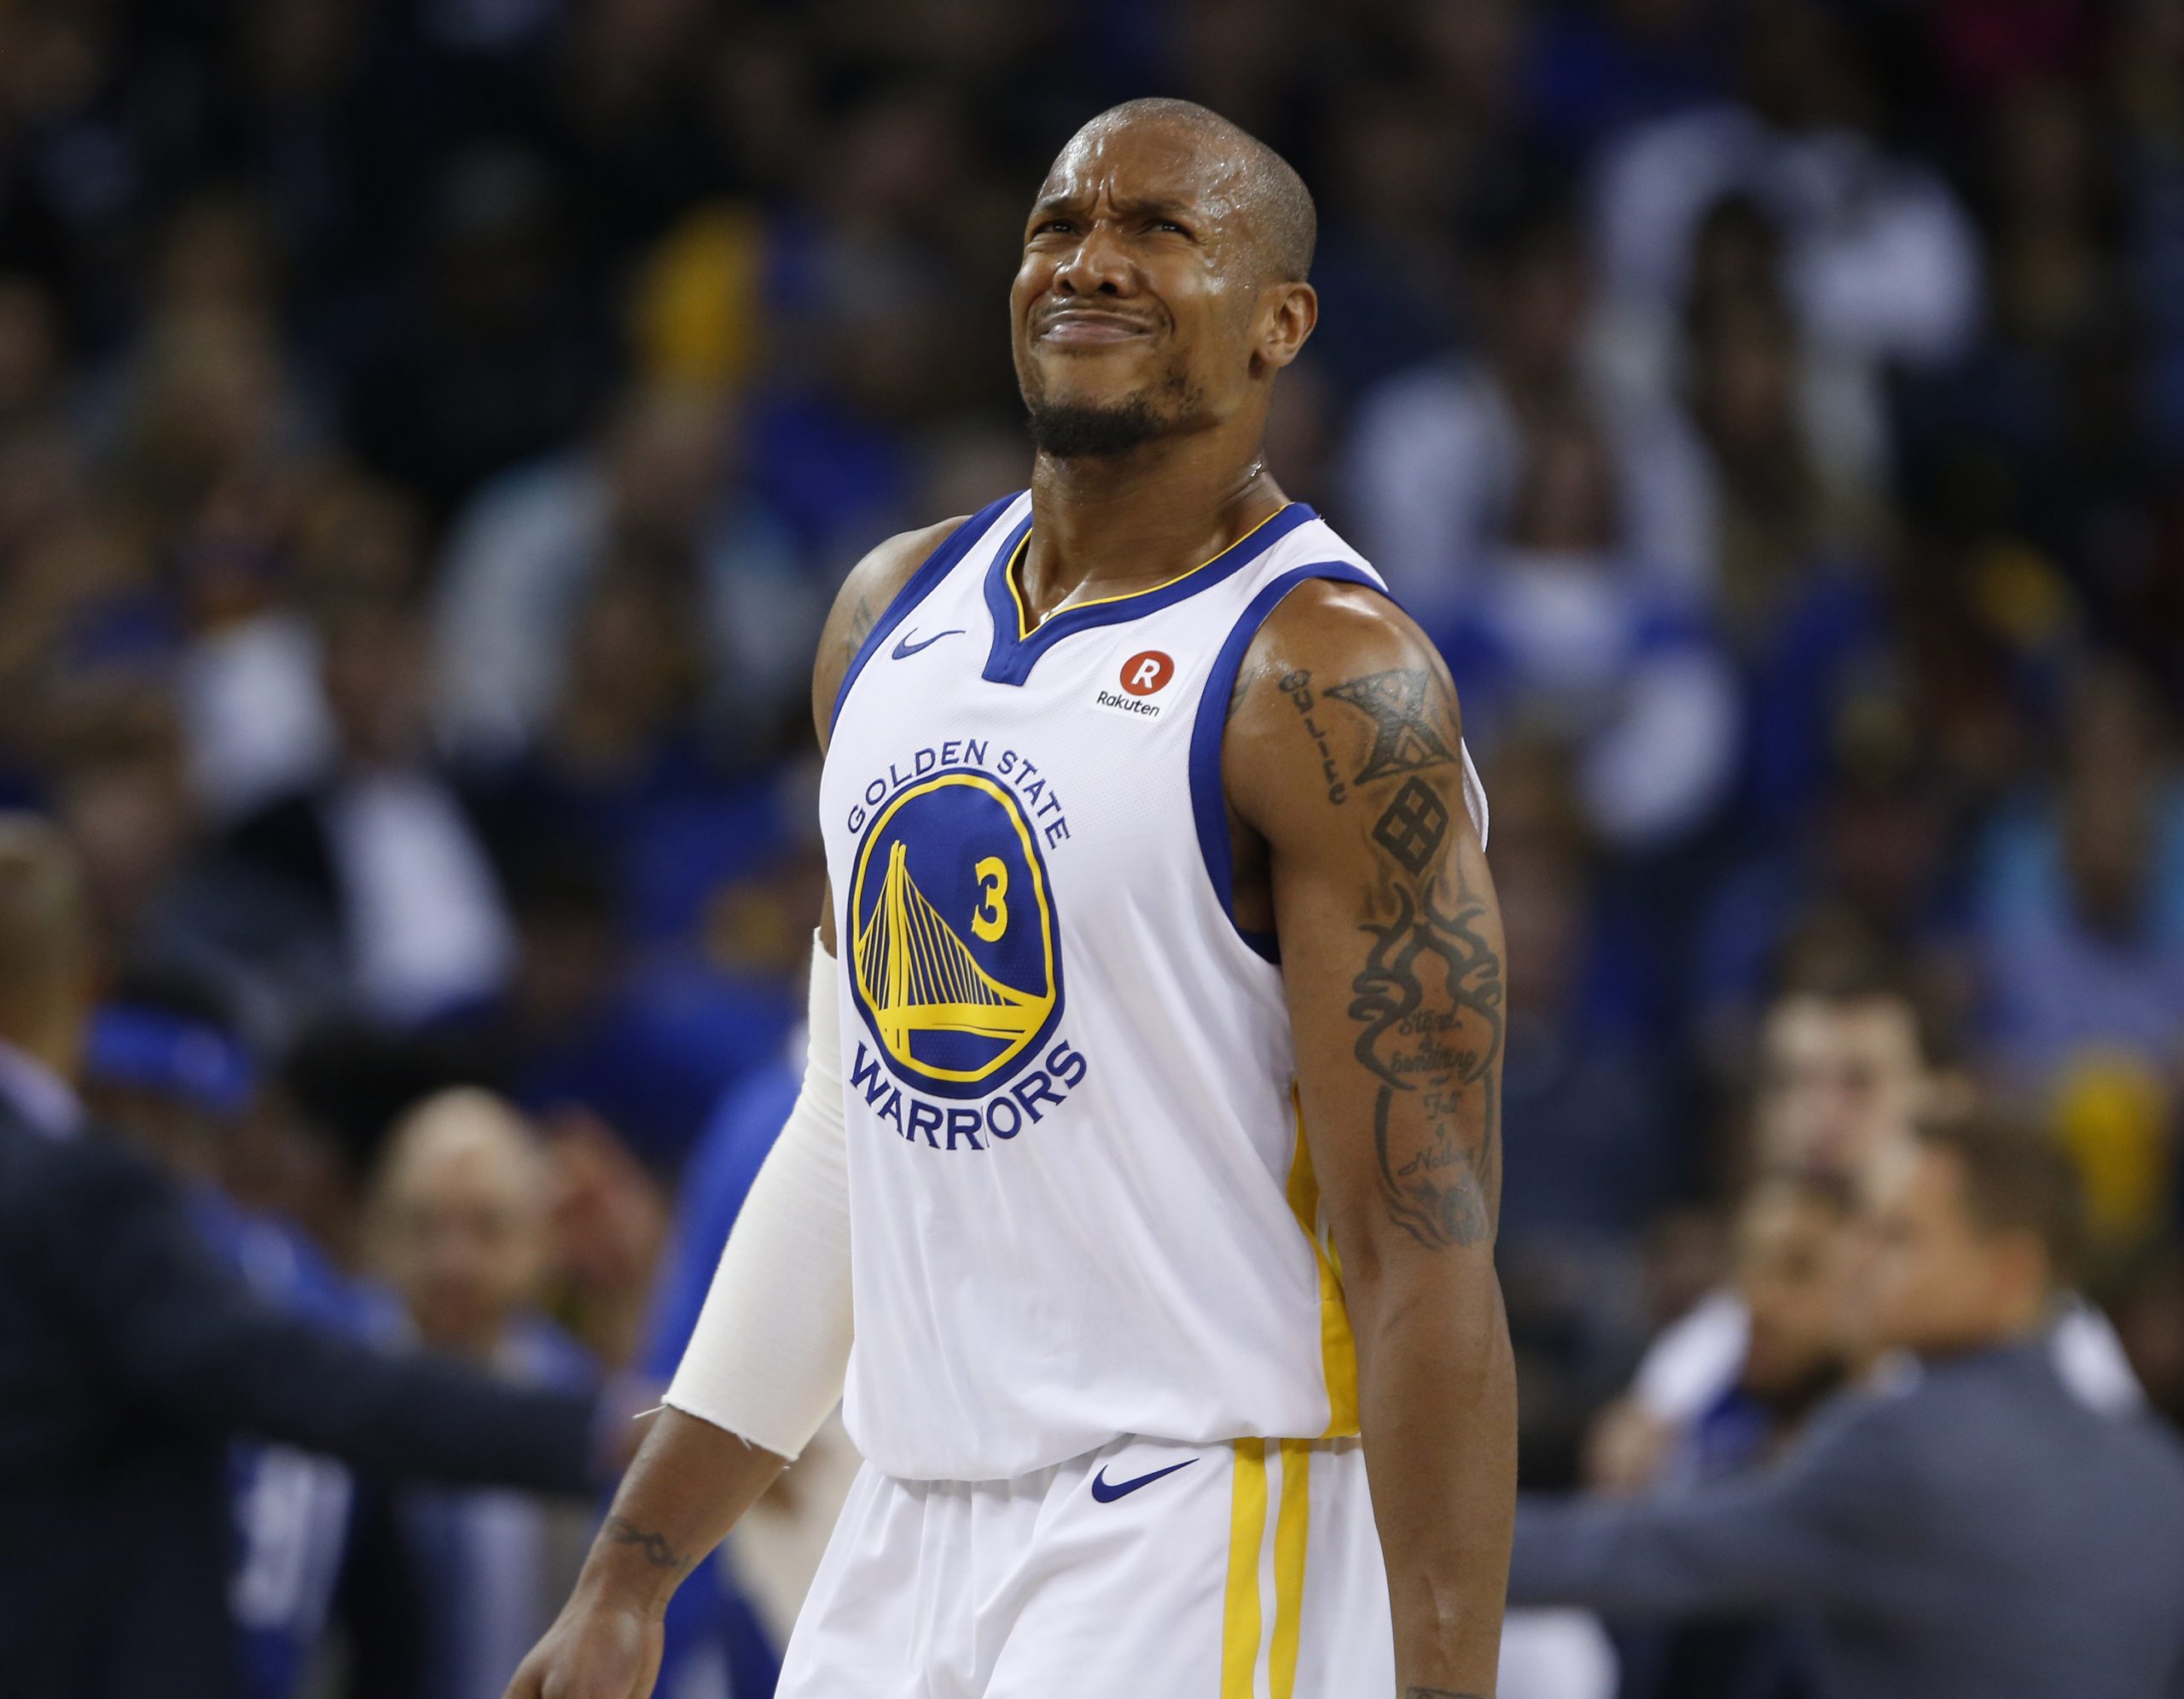 David West 2021 - Net Worth, Salary, Records, and Endorsements